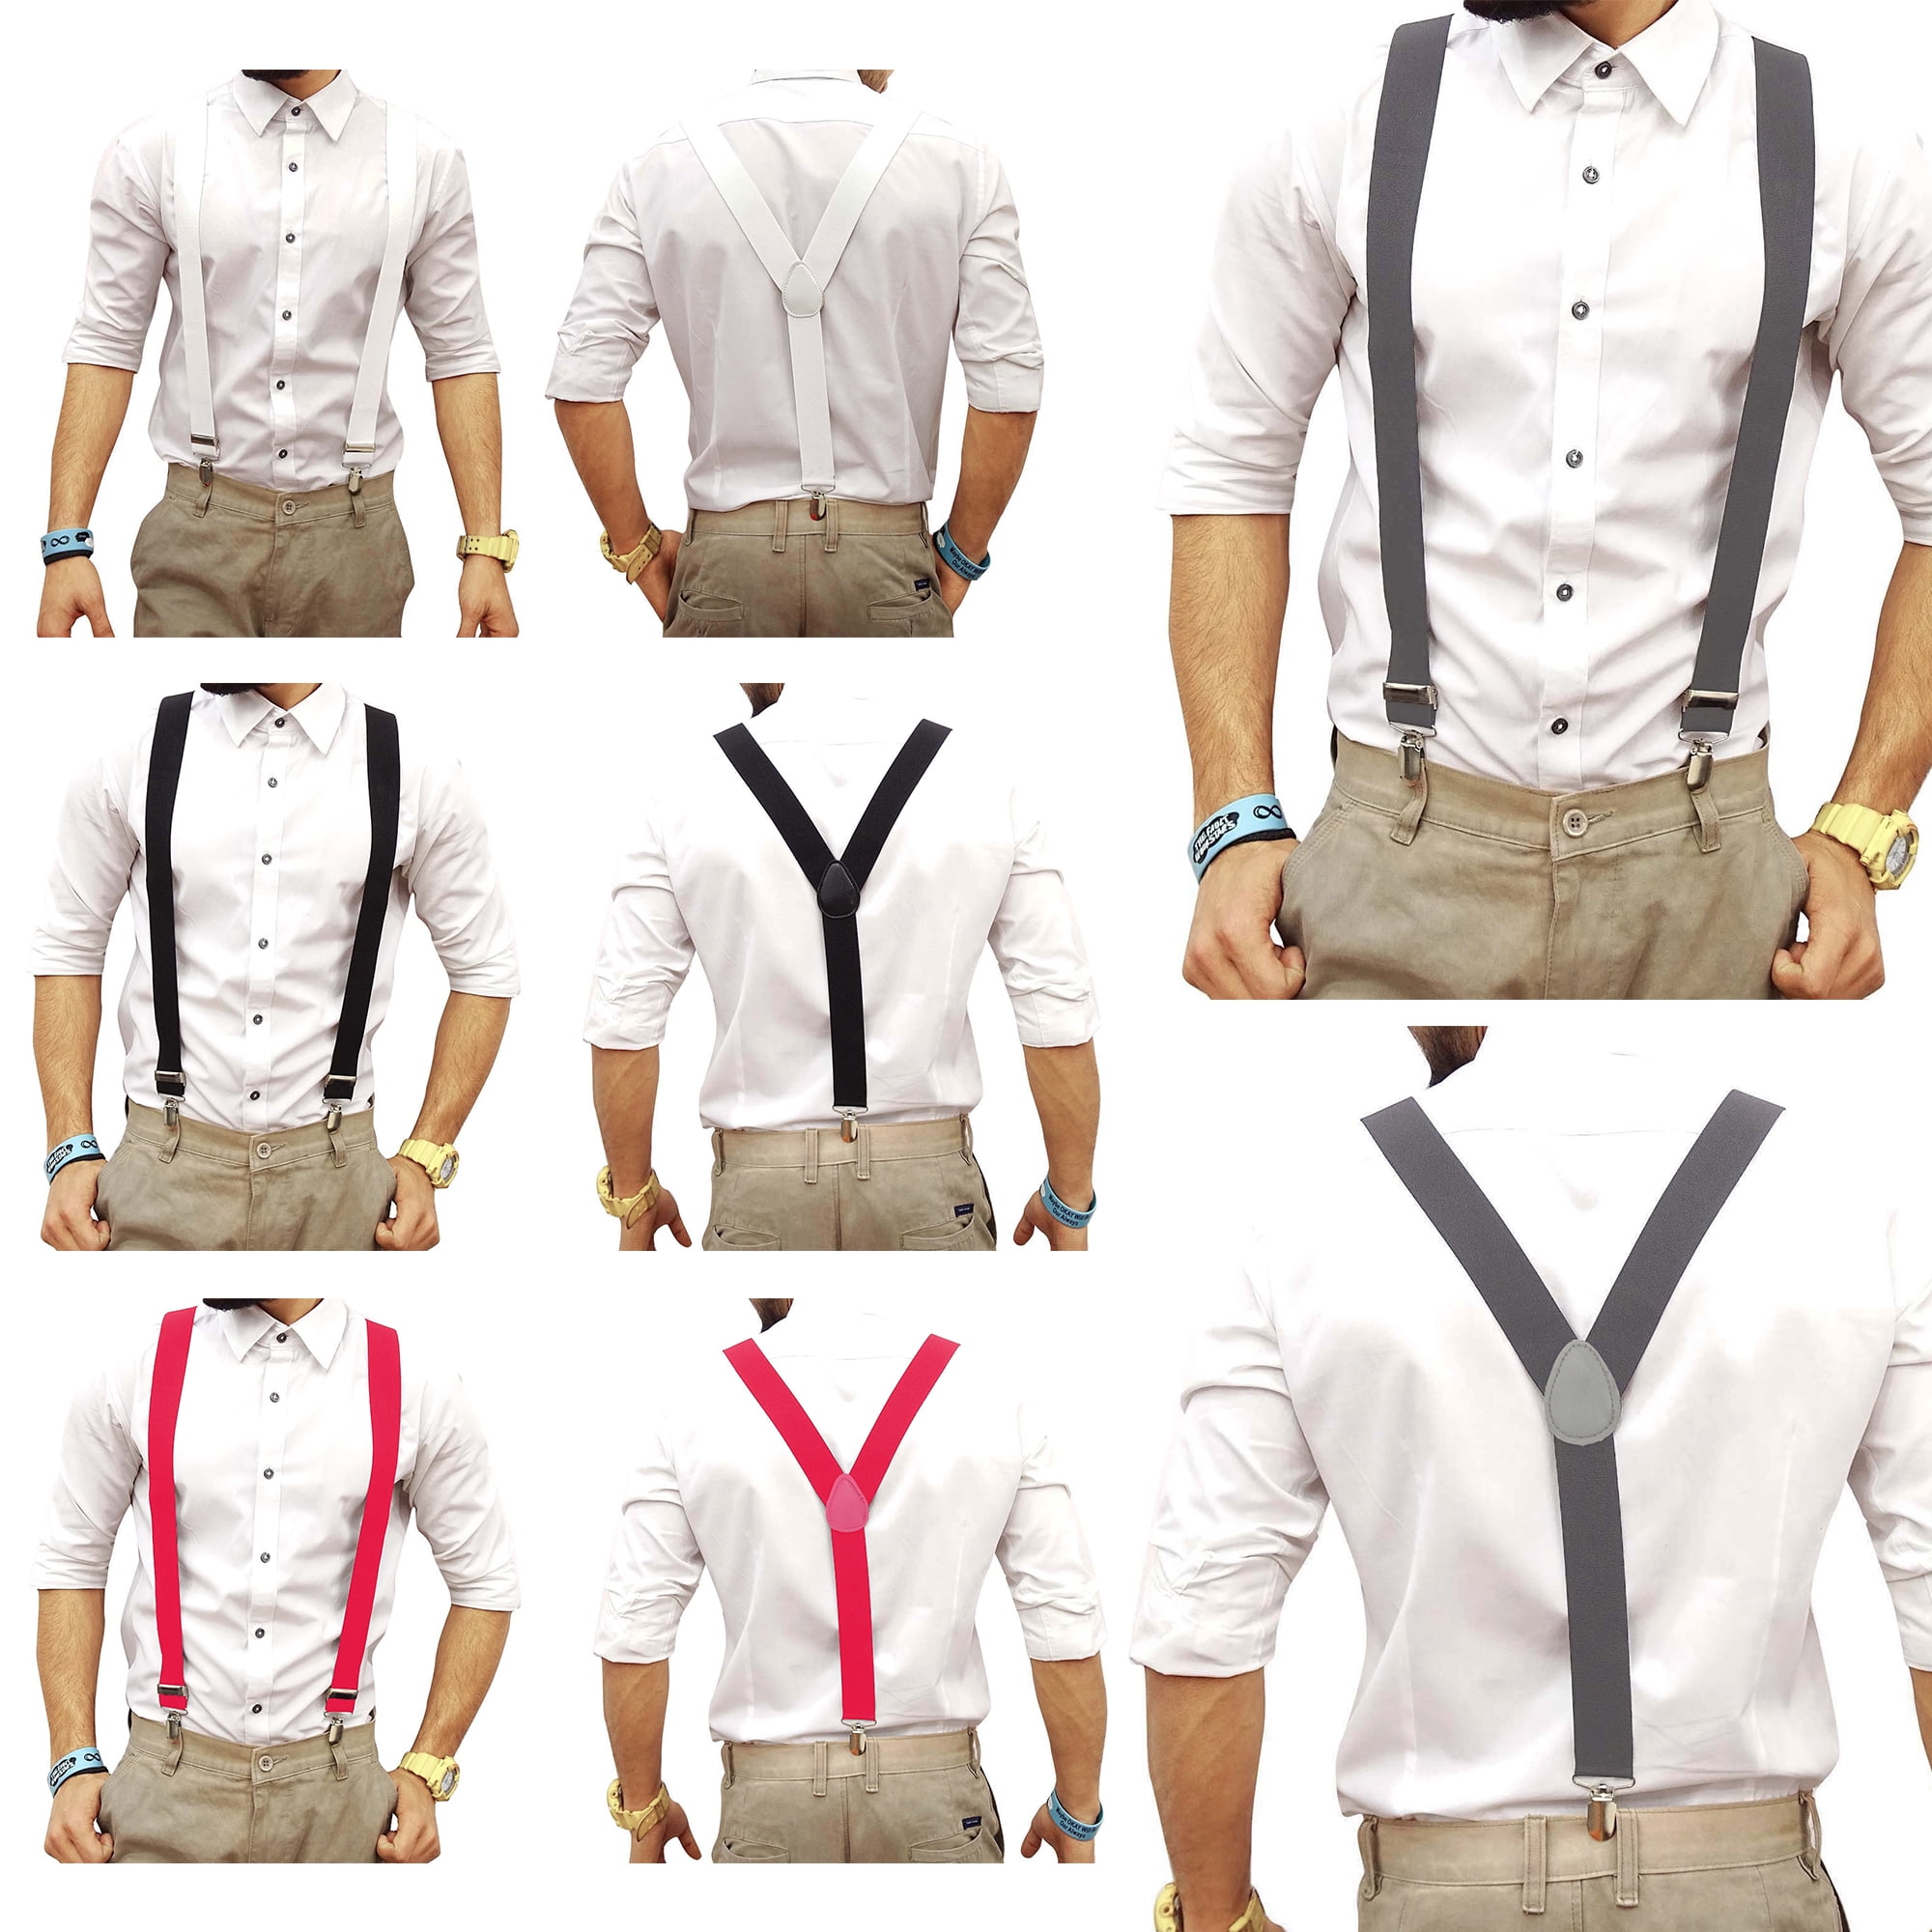 Men's X-Back Suspenders with Four Swivel Hooks - Stylish and Durable 1 3/8  Wide Elastic Straps